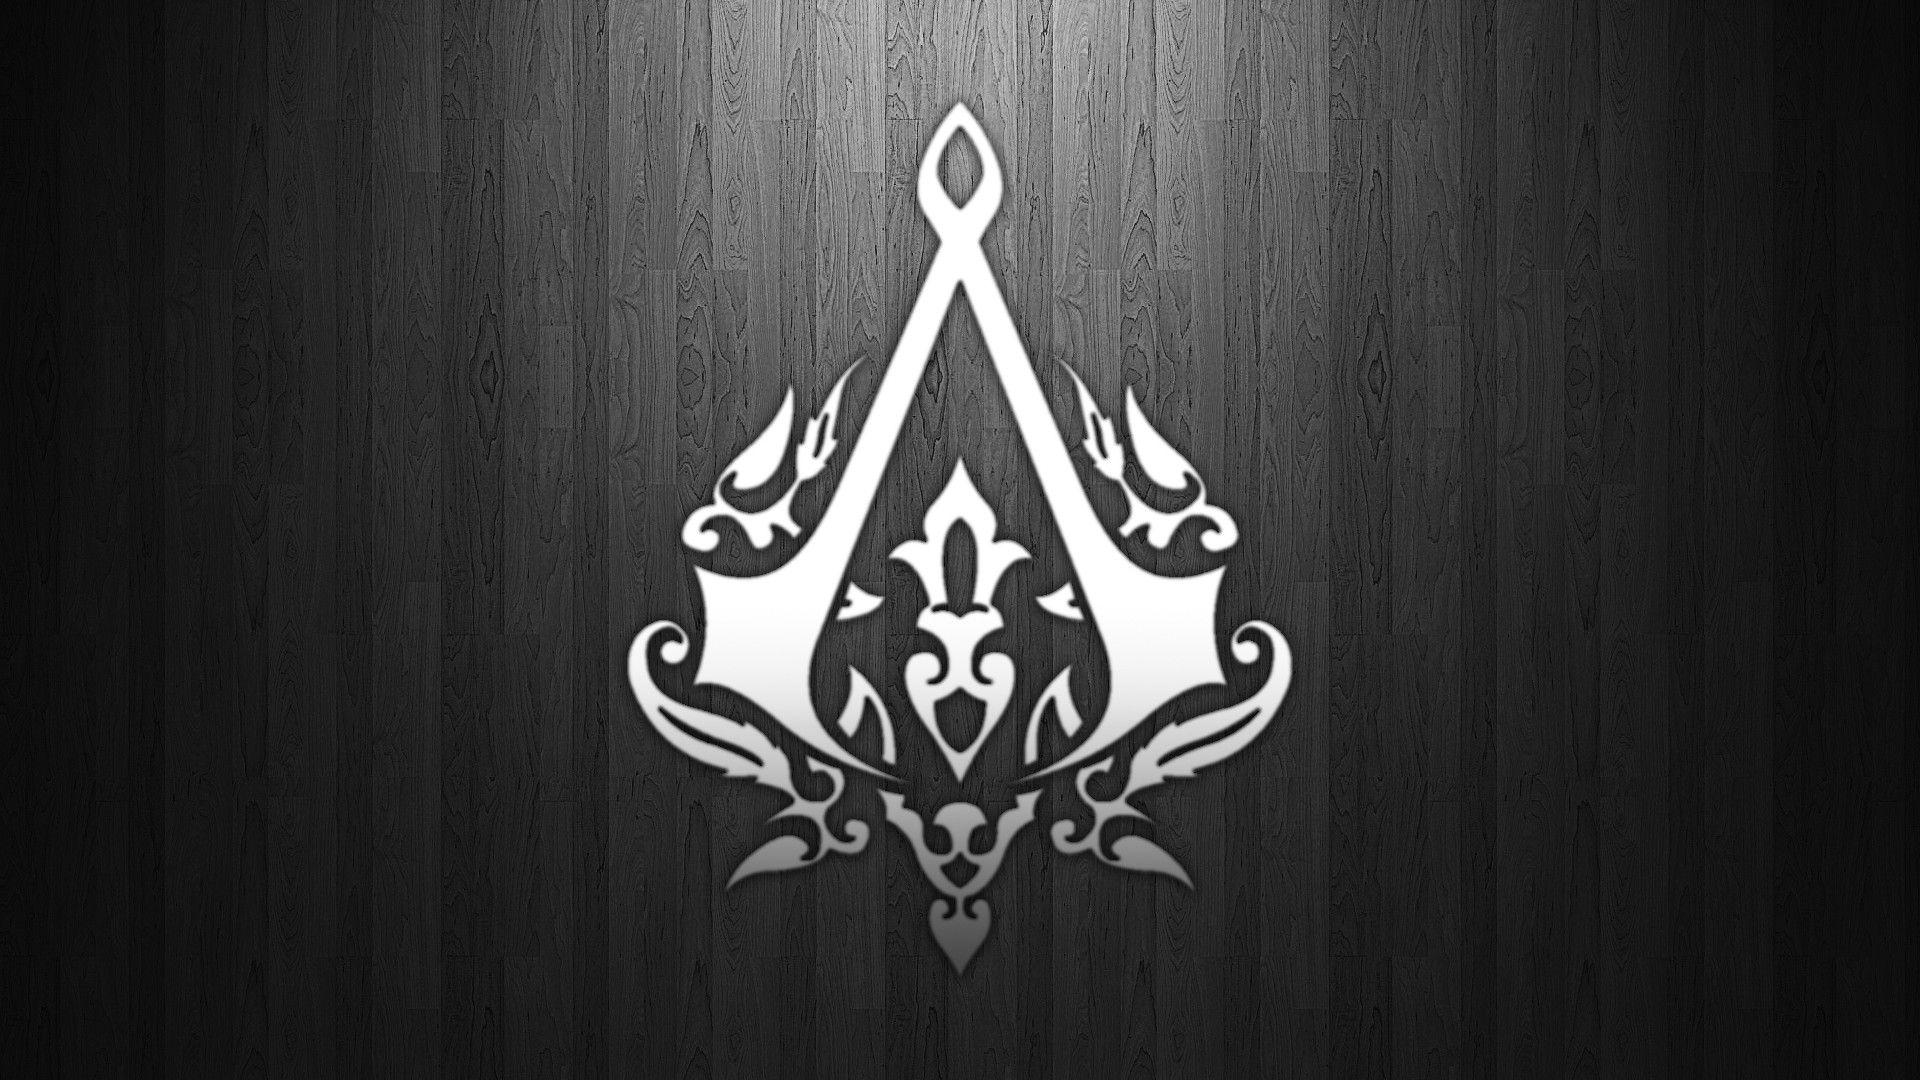 Assassin's Creed Background